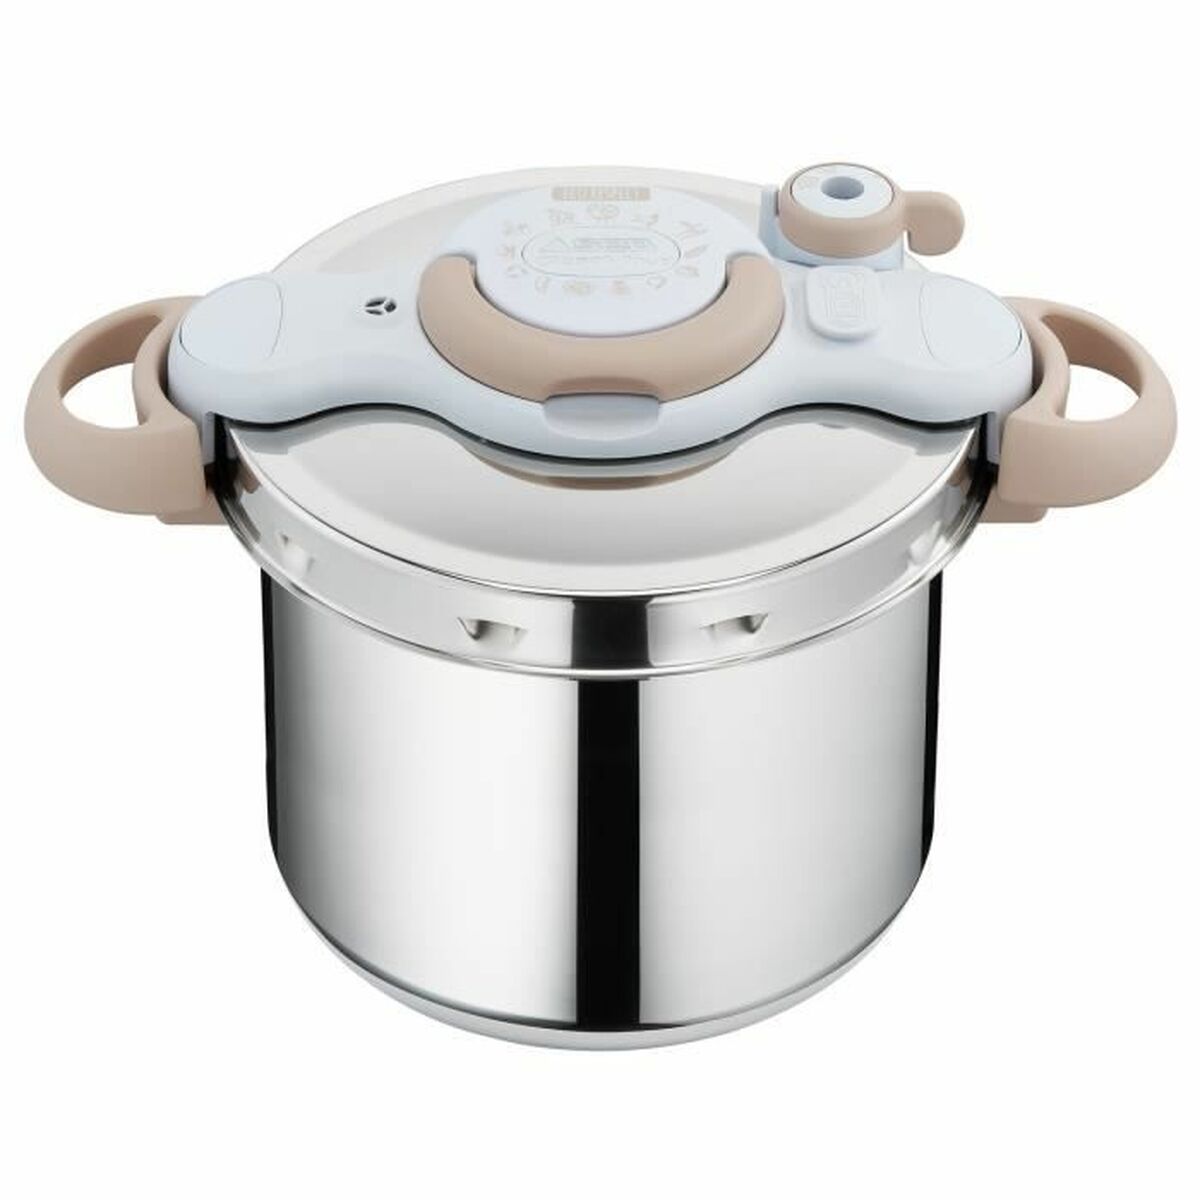 Pressure cooker SEB Cocotte-minute 9 L Stainless steel Silver